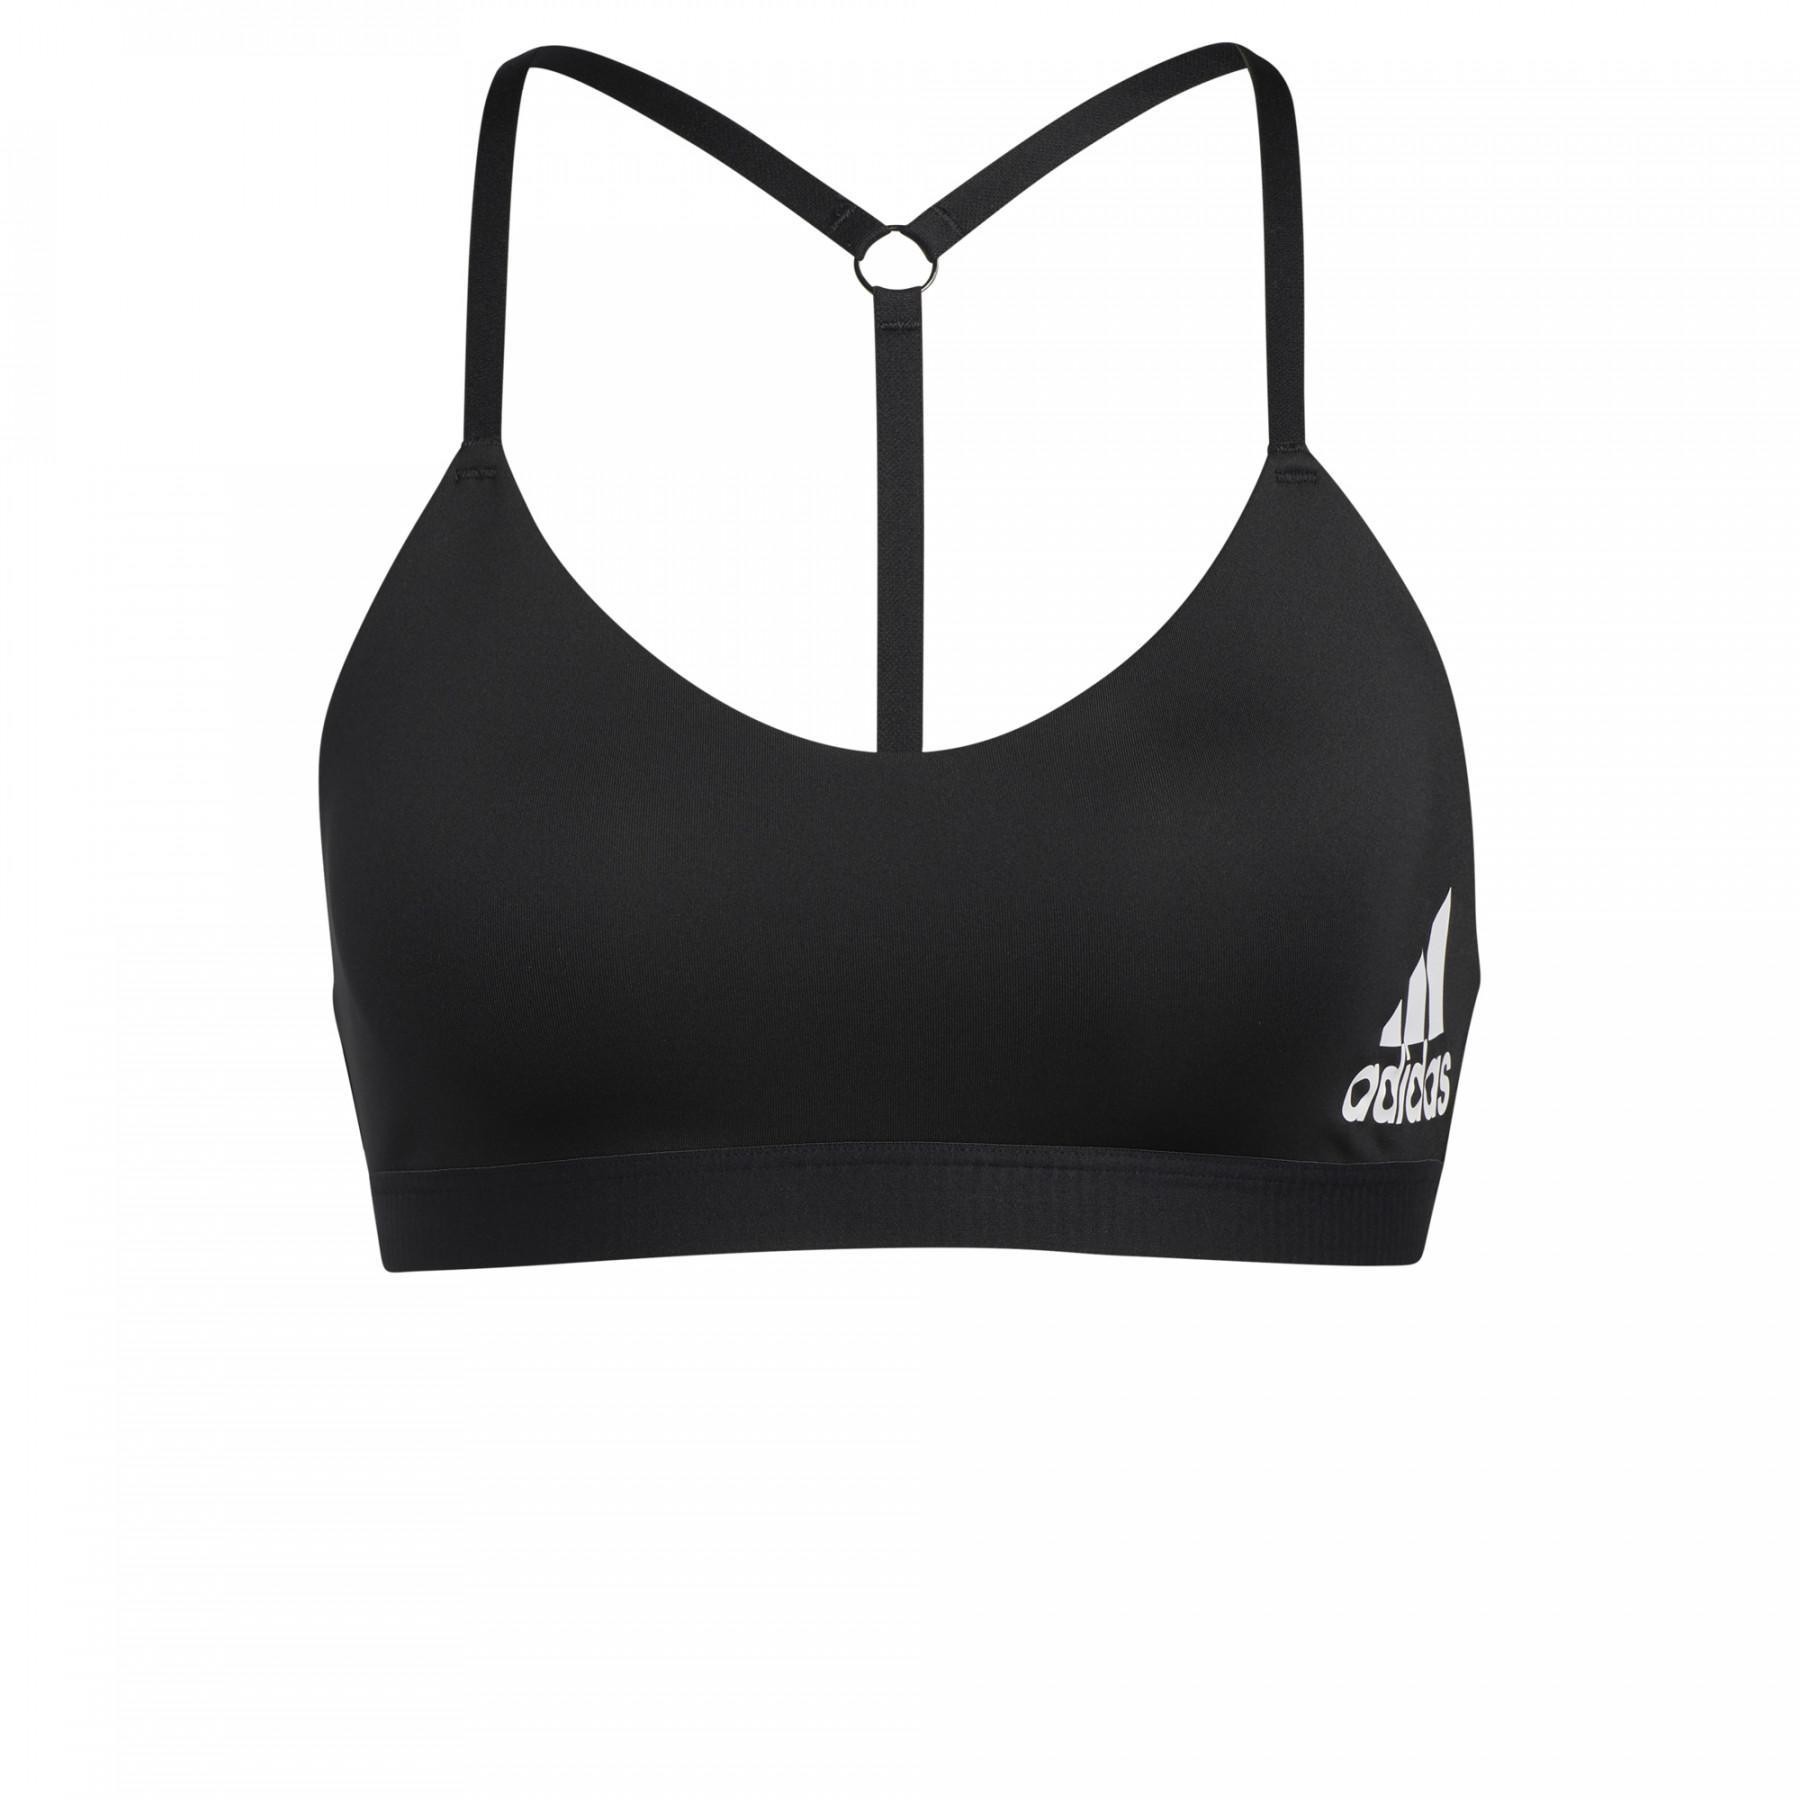 Brassière femme adidas All Me Light  Support Training